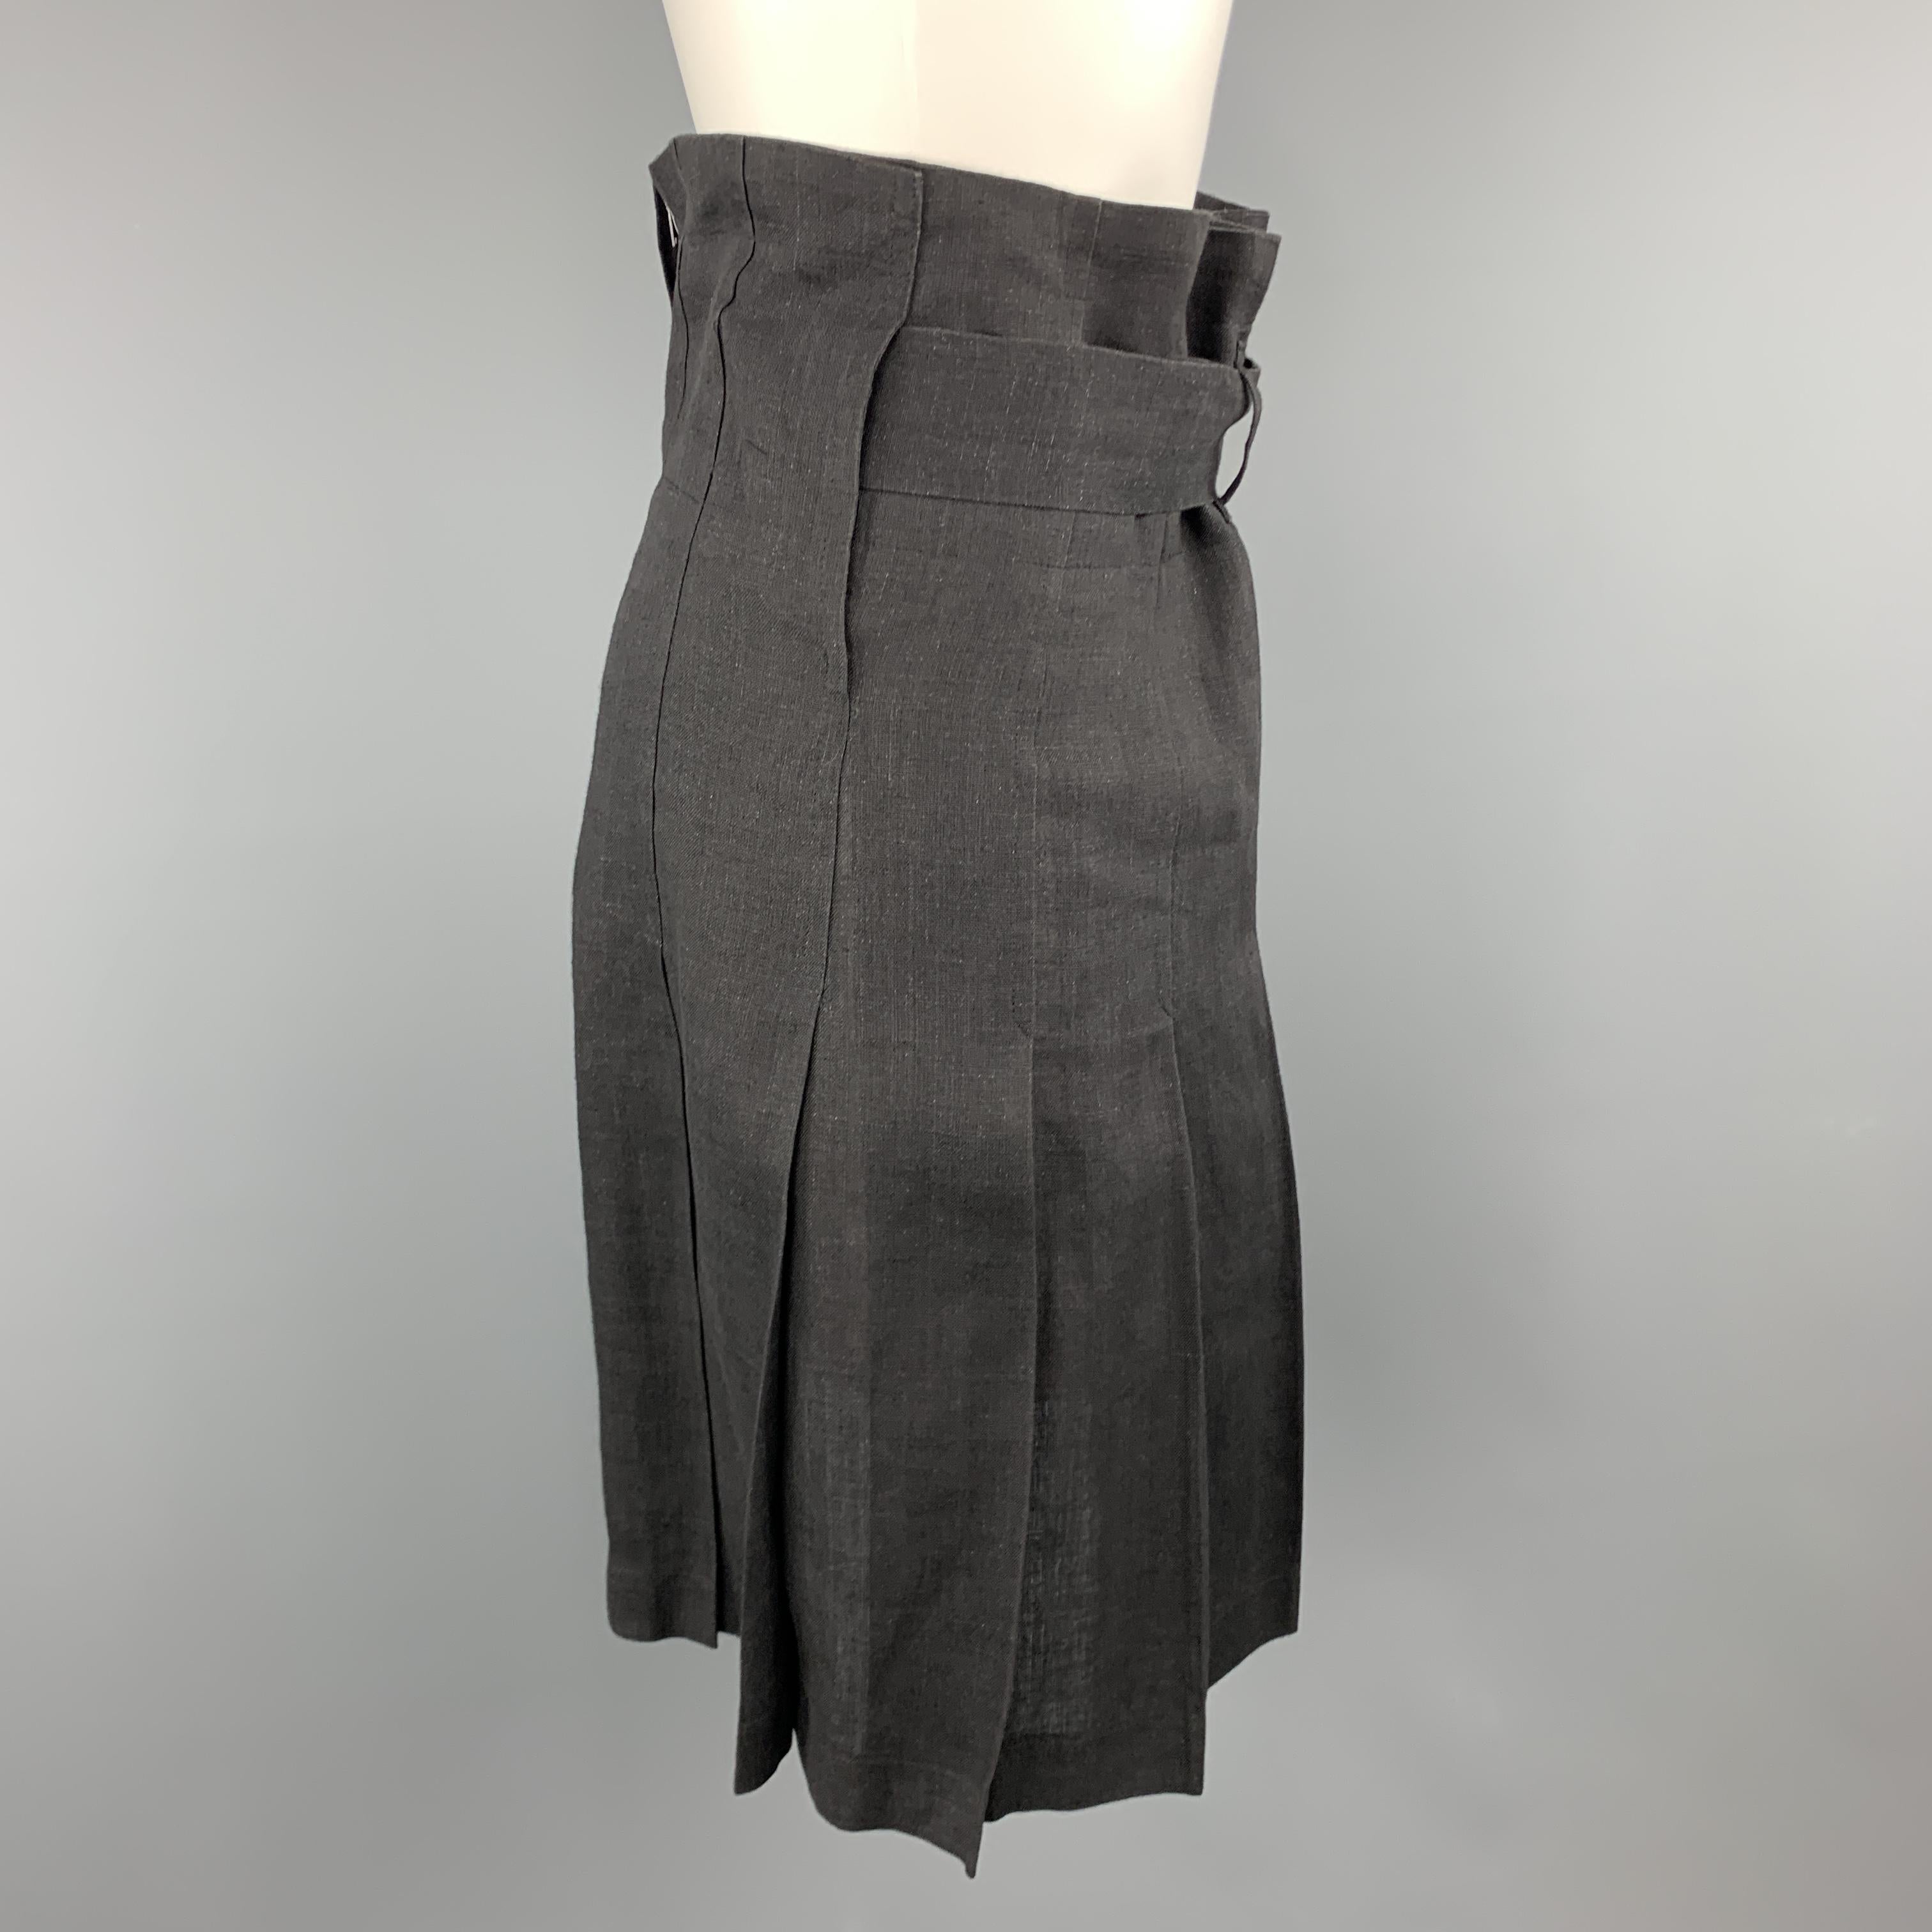 pencil skirt with pleated back